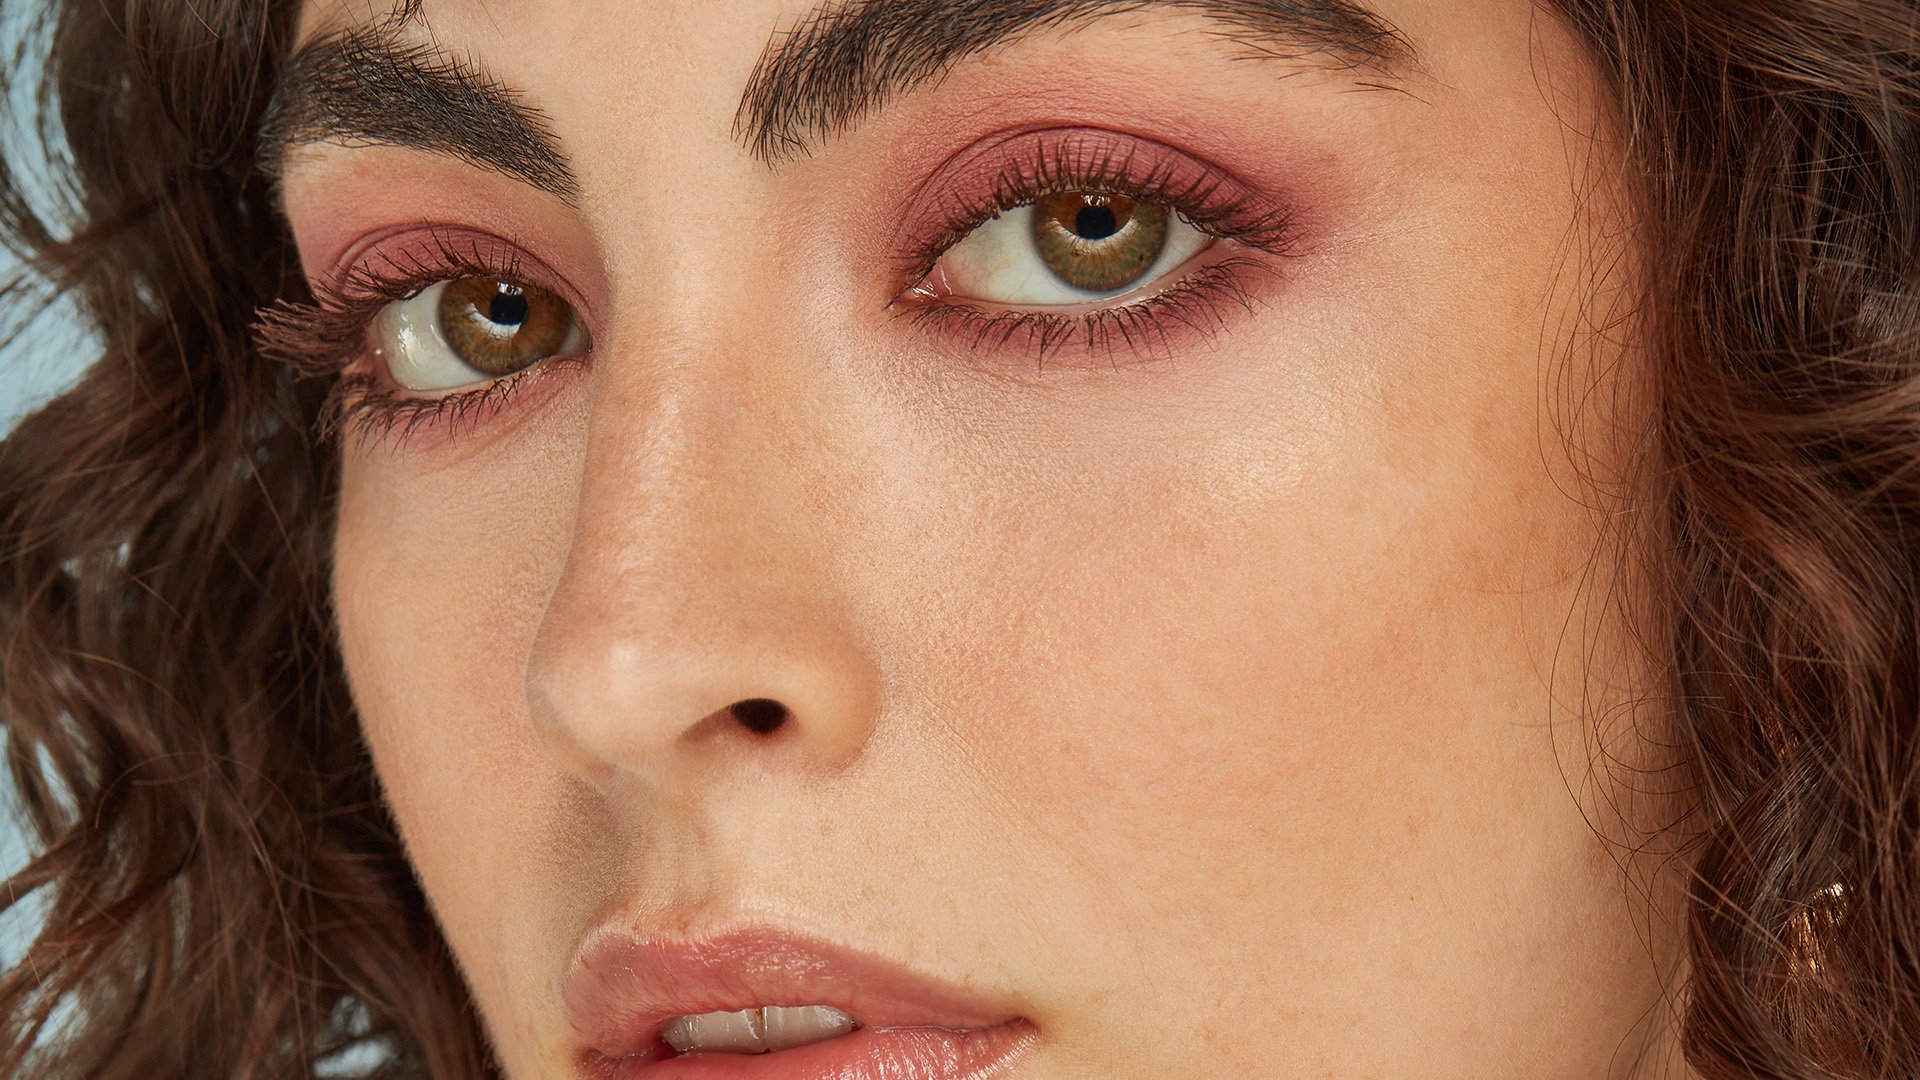 HOW TO CREATE A SOFT PINK EYE LOOK